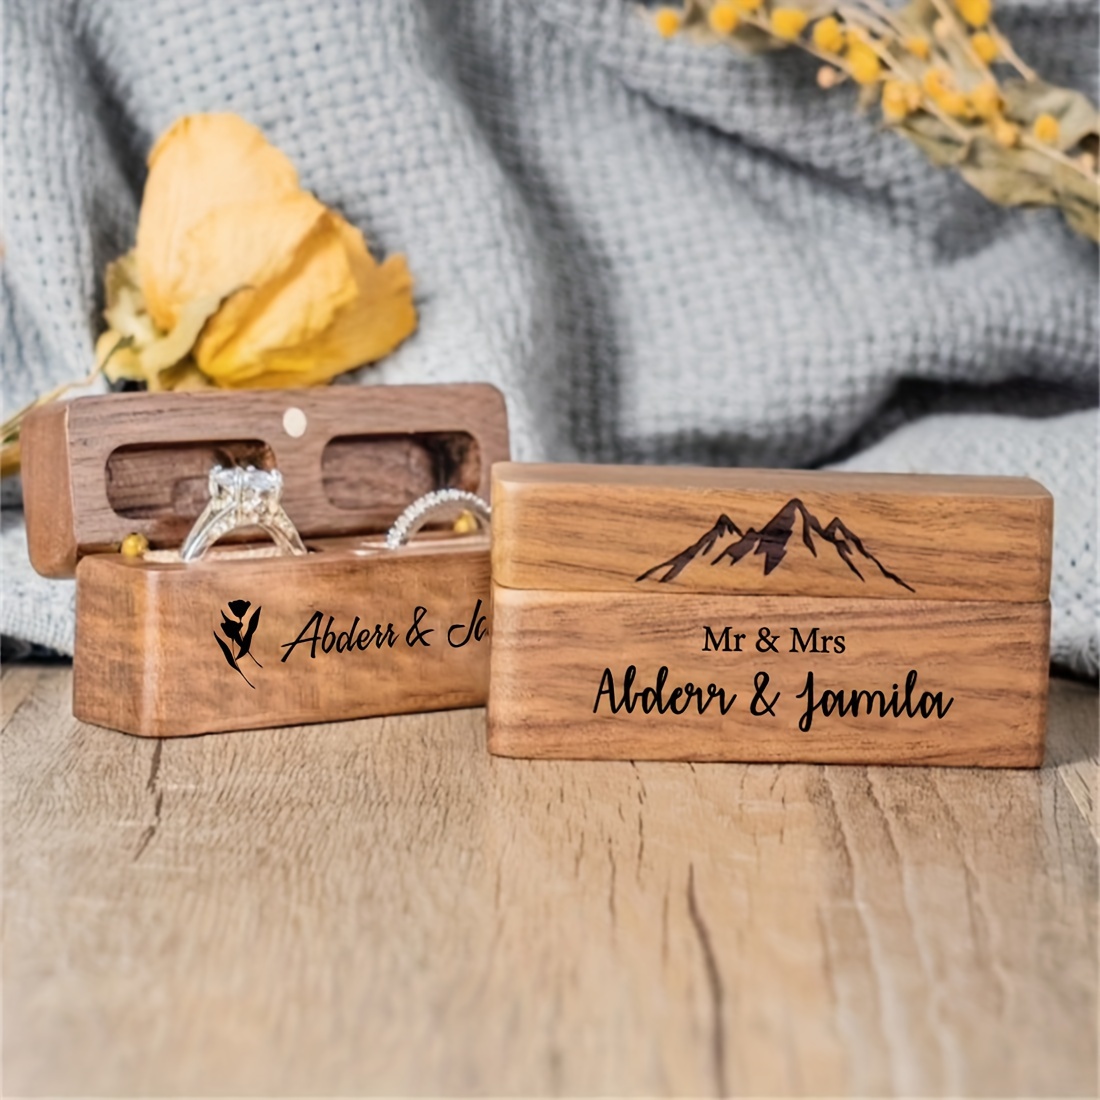 

Personalized Ring Bearer Box Custom Rustic Wedding Engagement Engraved Name Date Wooden Valentine's Day Gift Ring Box Holder Elegant Upscale Style